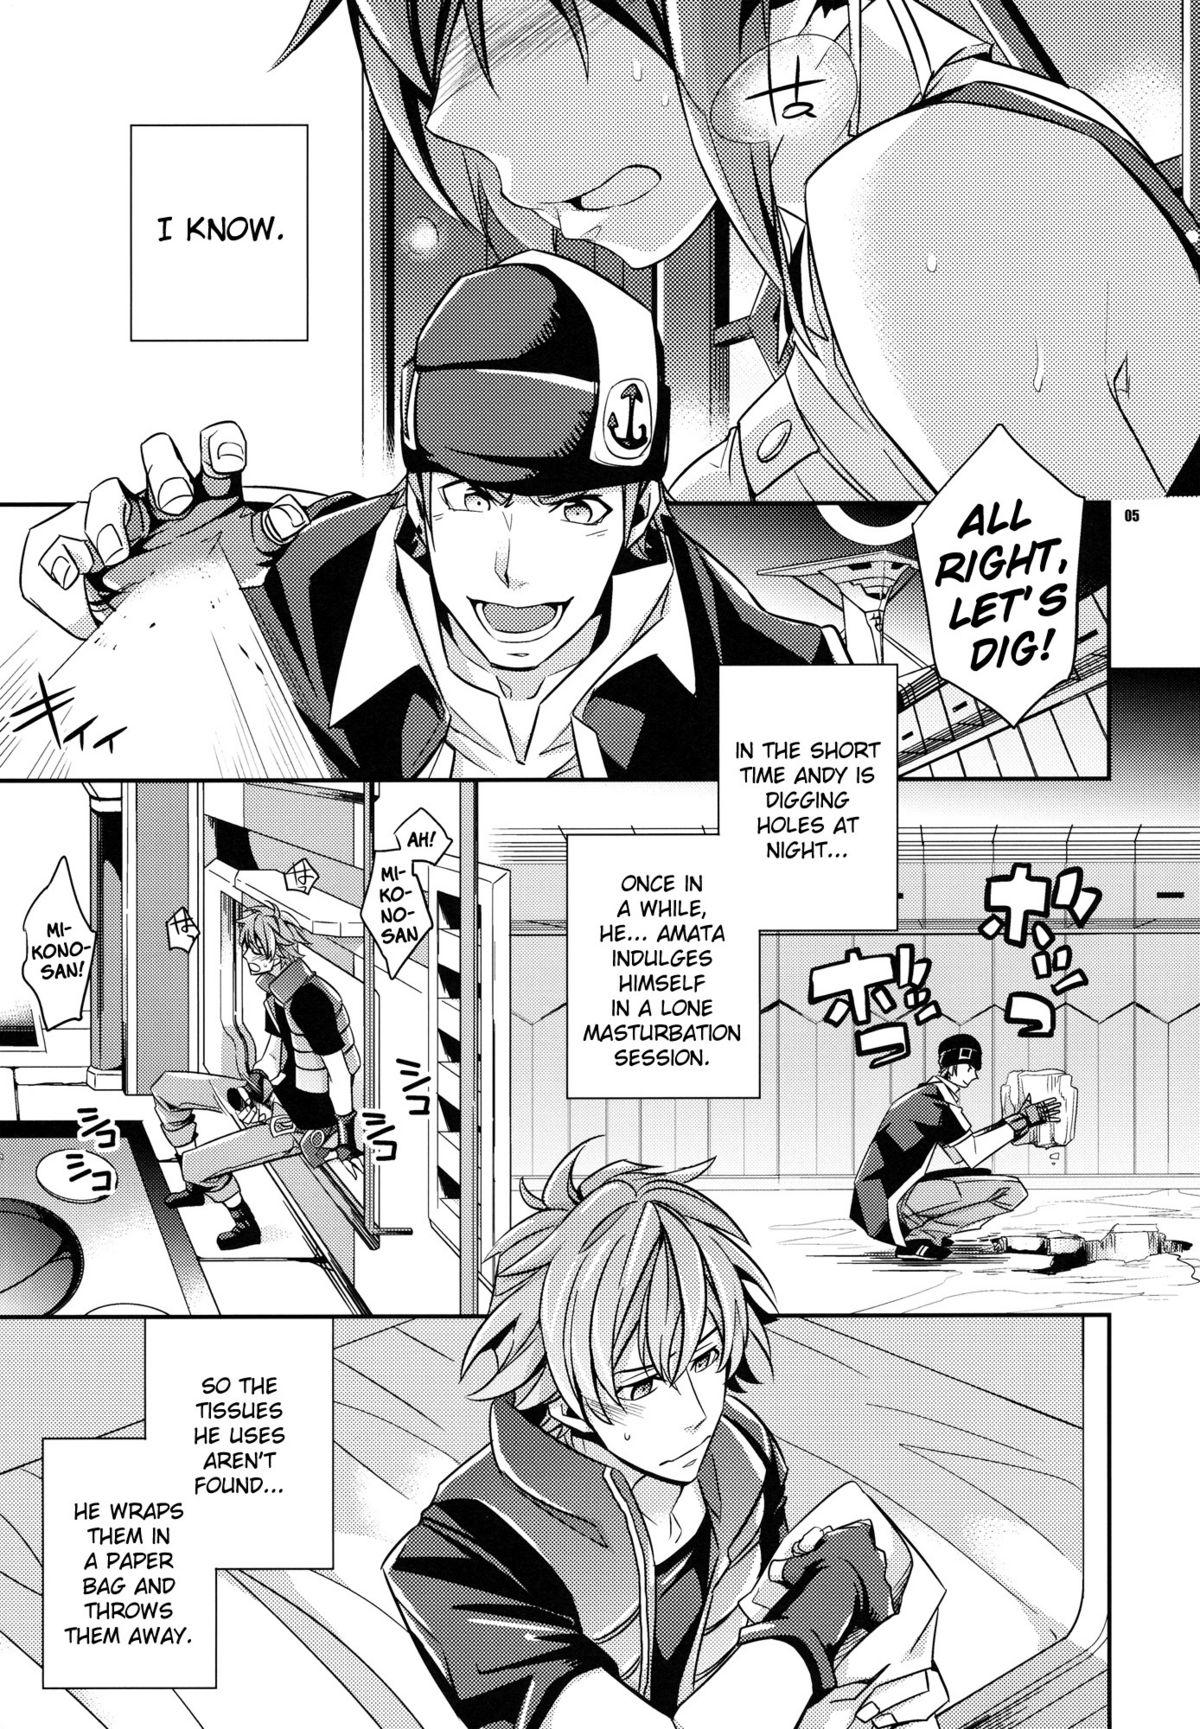 Brasil Zessica no Koufukuron | Zessica's Theory of Happiness - Aquarion evol Doggie Style Porn - Page 3